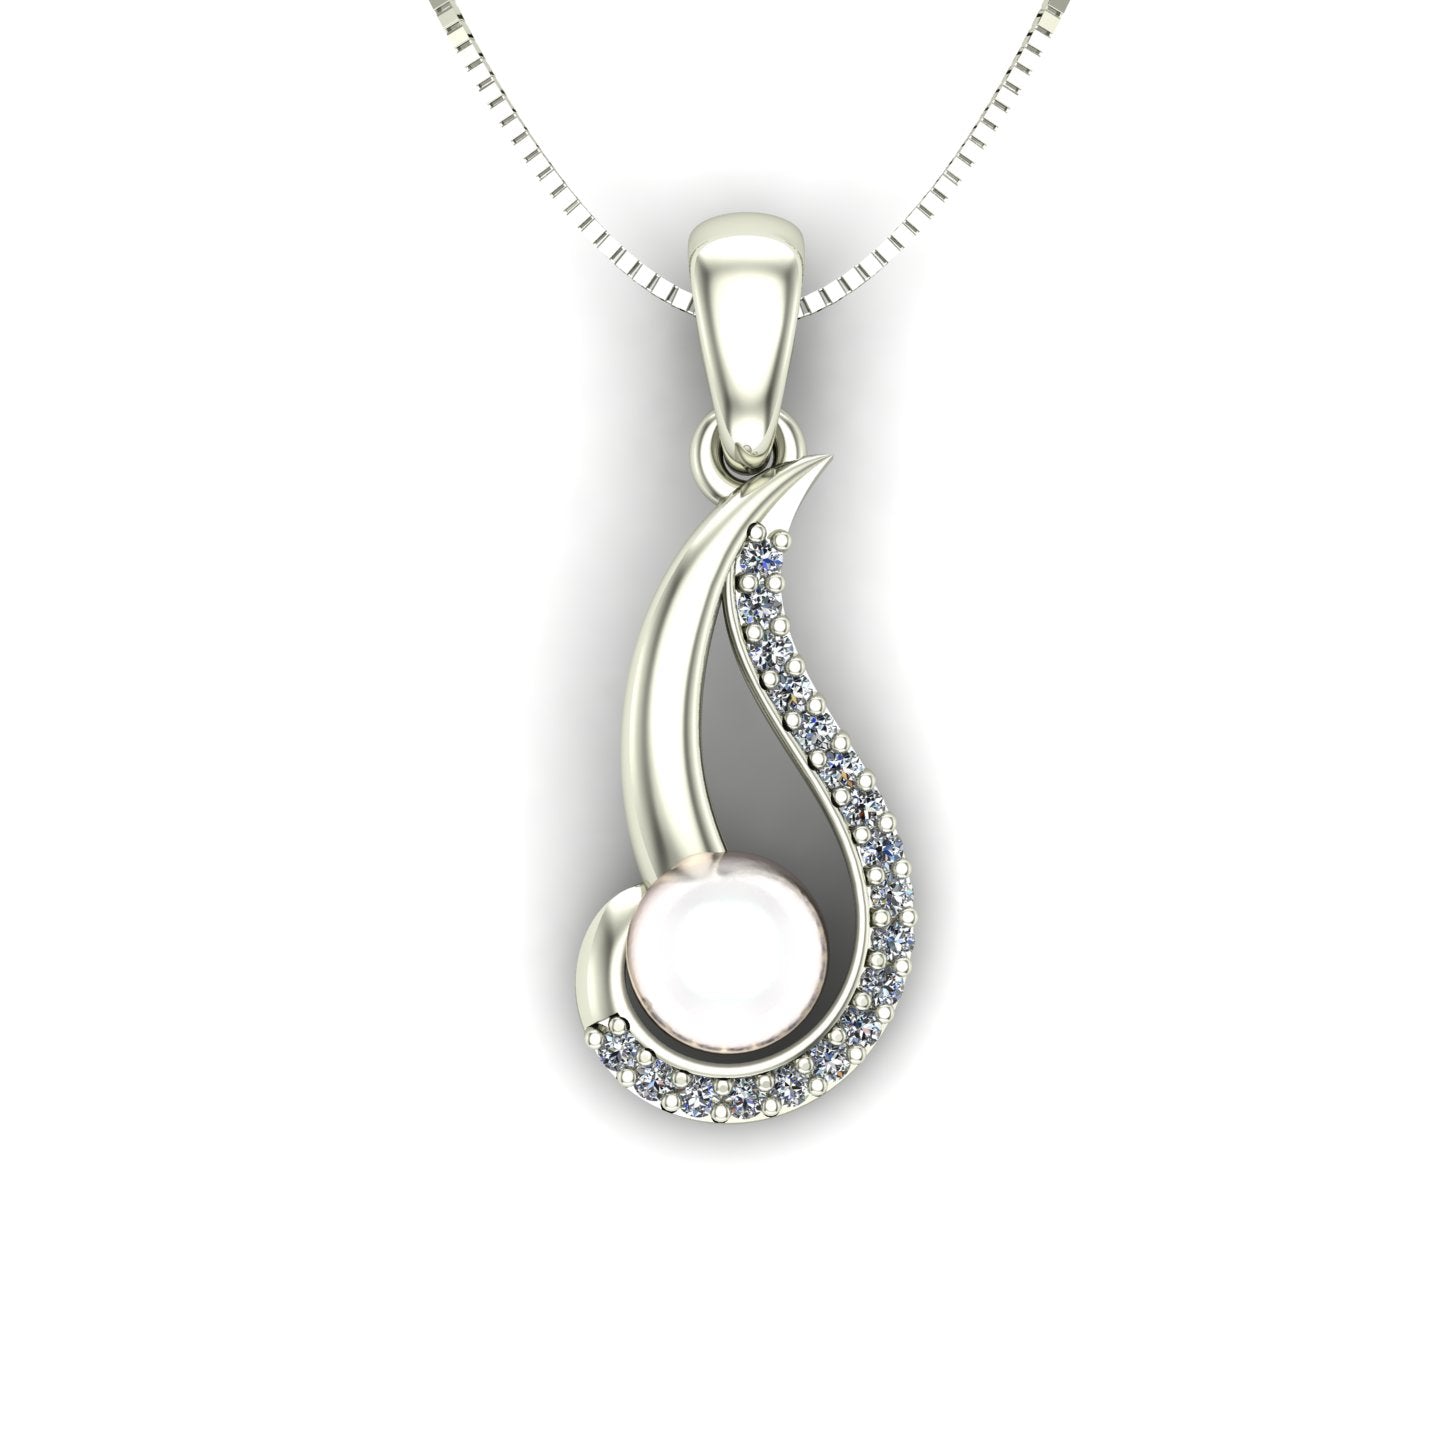 pearl and diamond swirl pendant in 14k white gold - Charles Babb Designs - top view